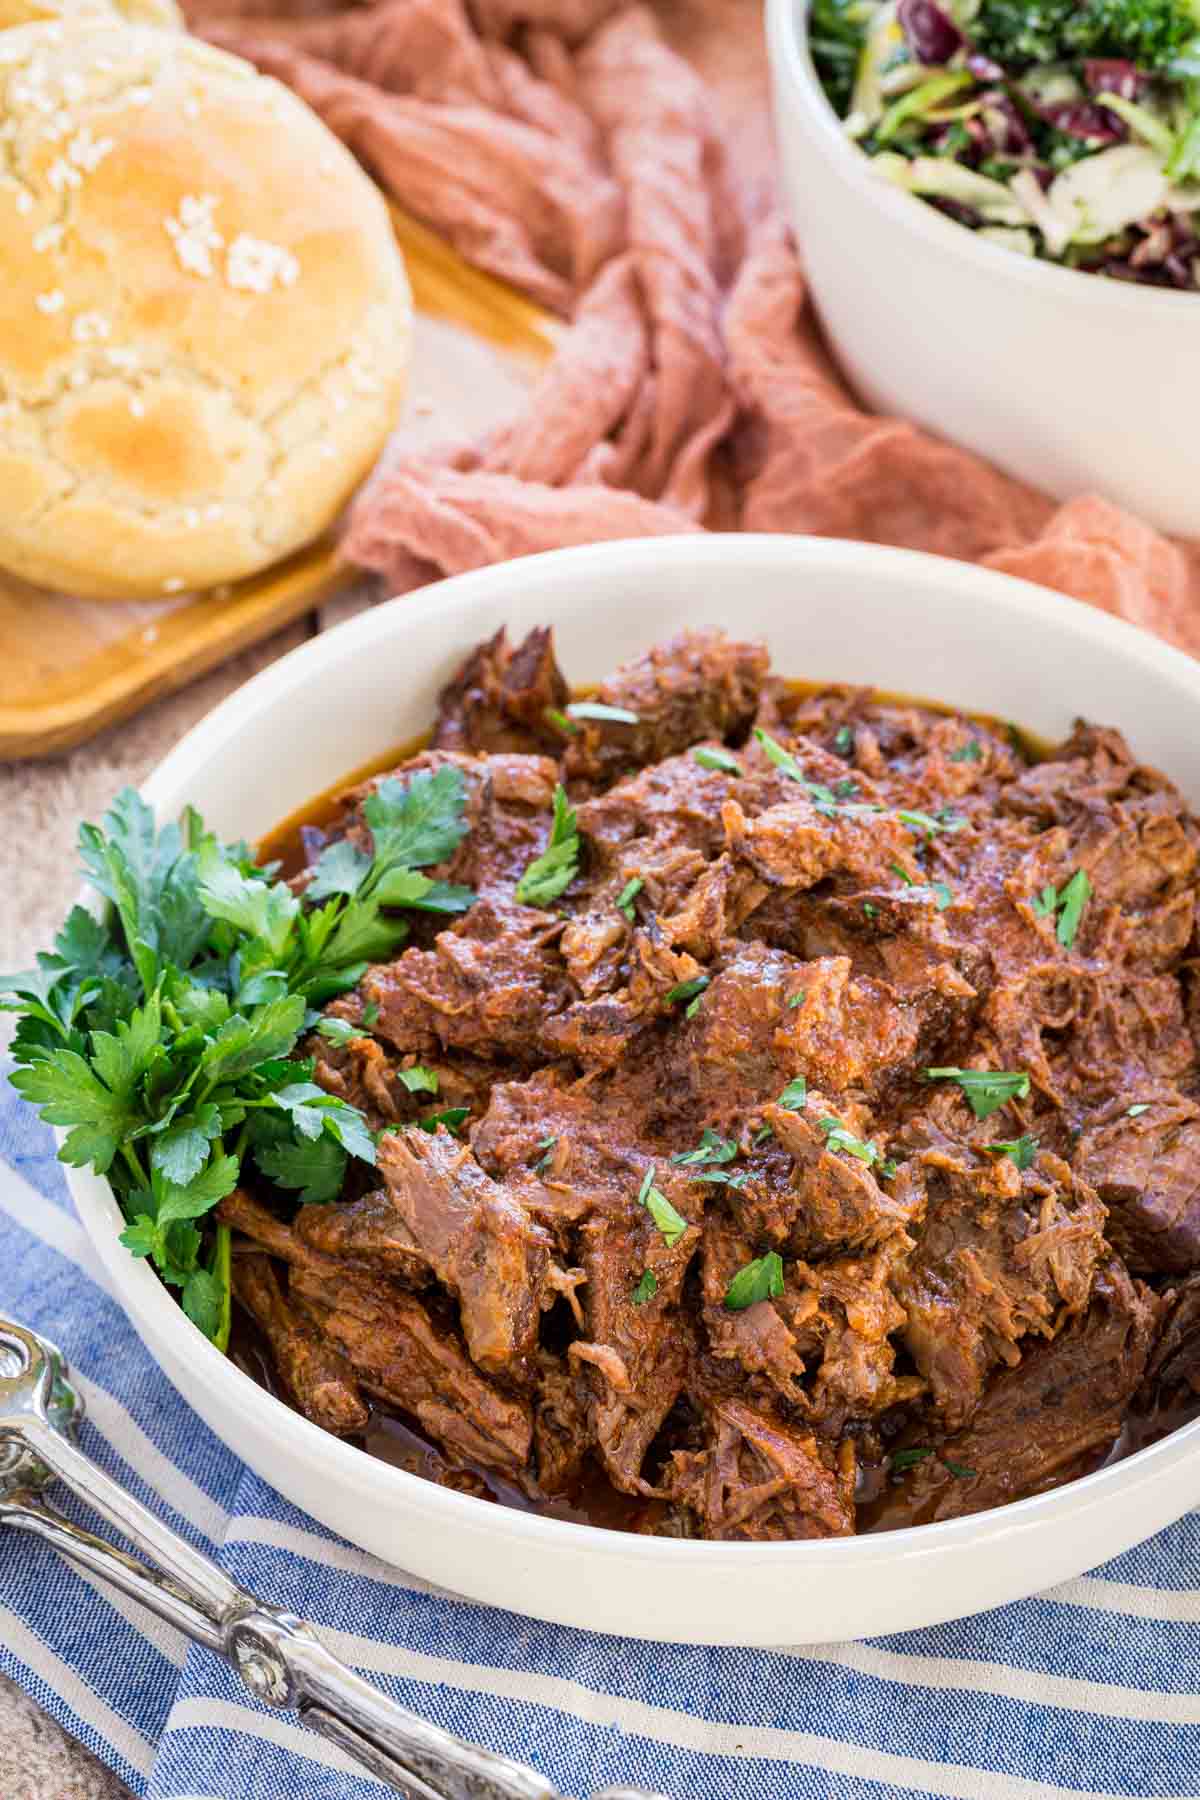 A bowl of Crockpot barbecue beef next to gluten-free buns.